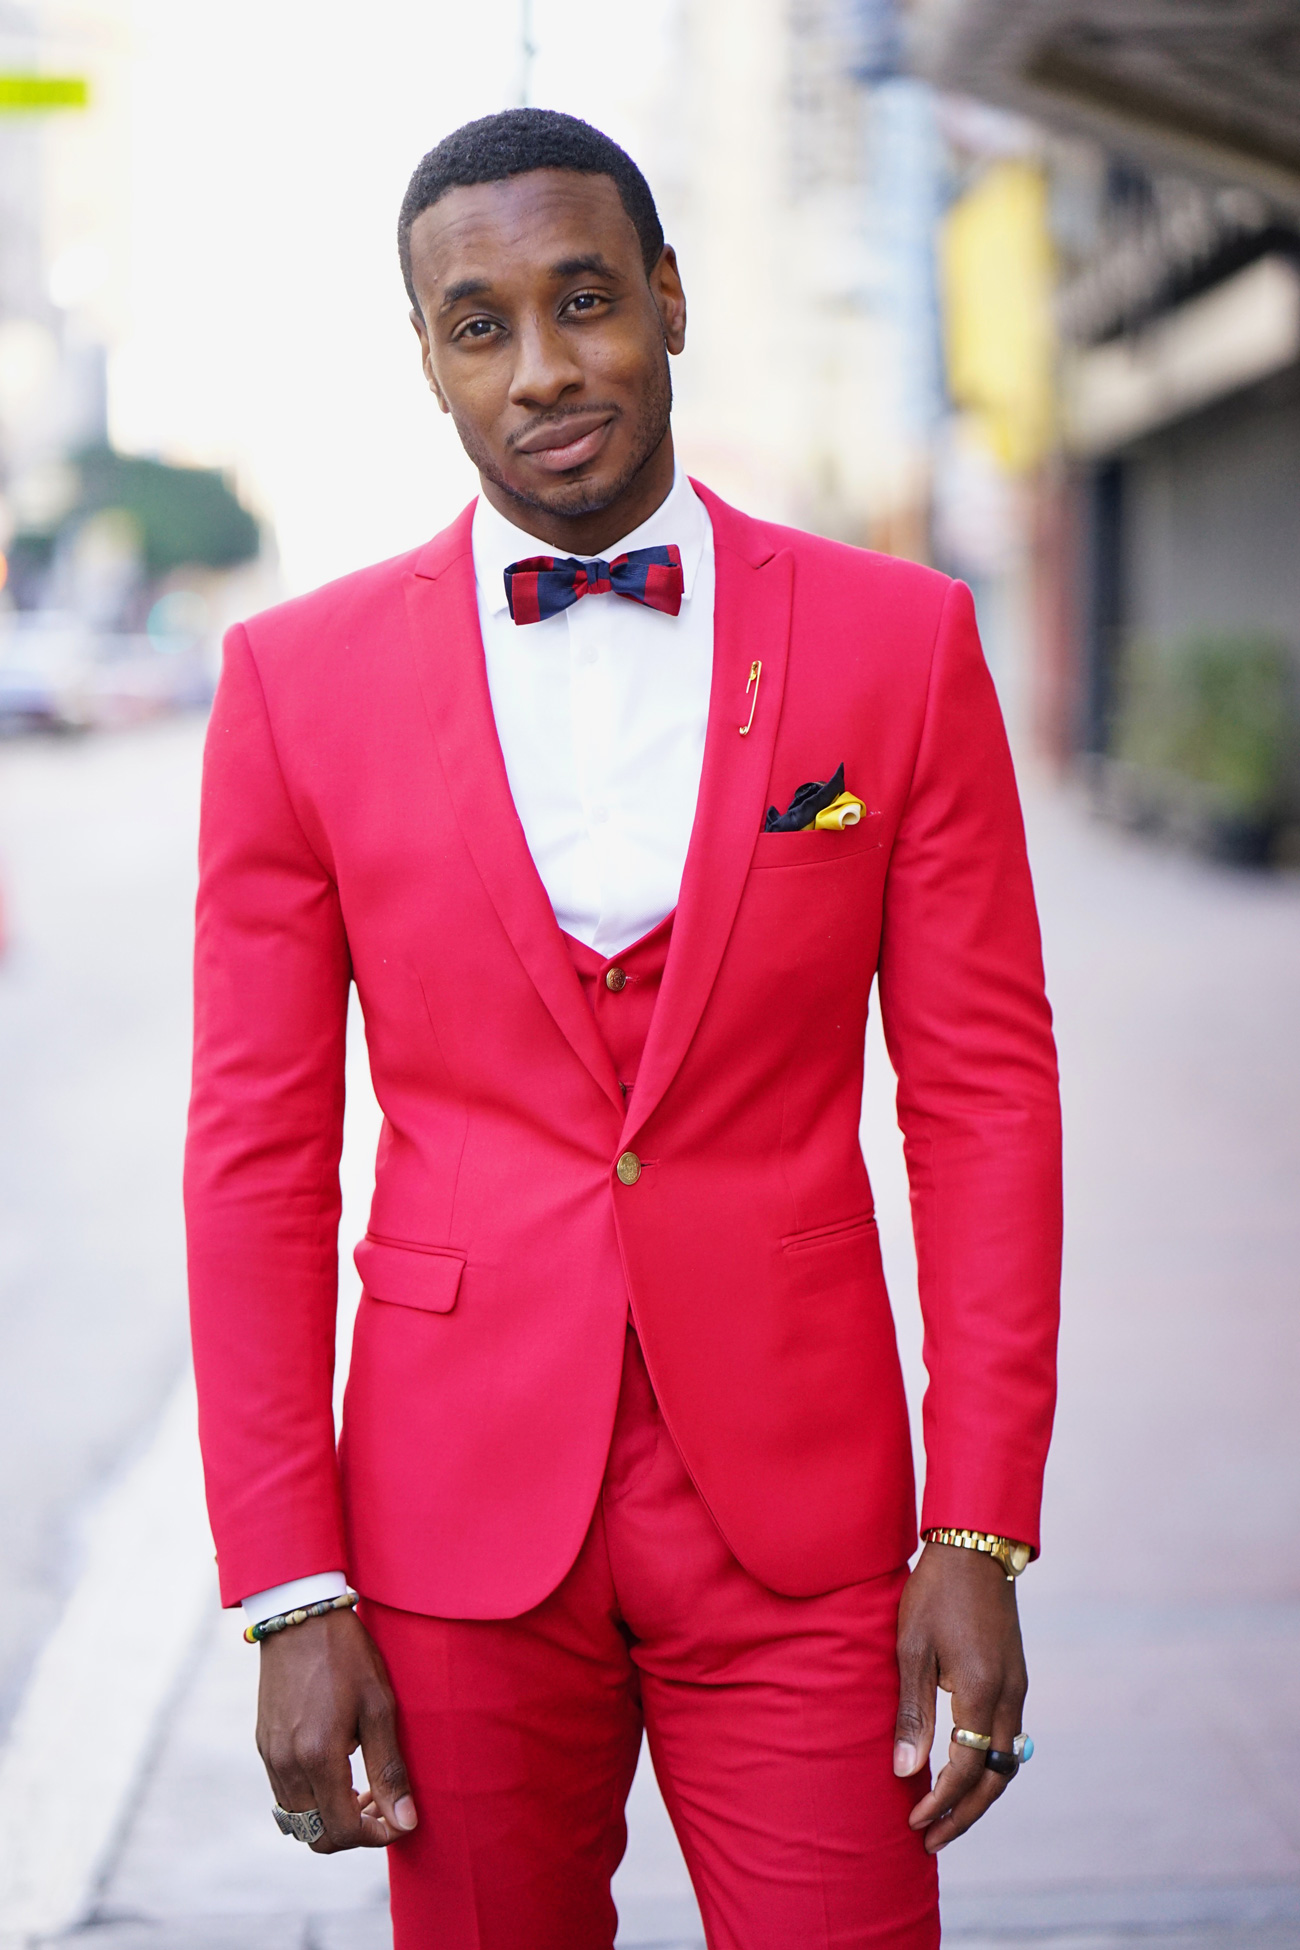 OOTD: RED 3 PIECE SUIT IN BUSINESS ATTIRE – Norris Danta Ford